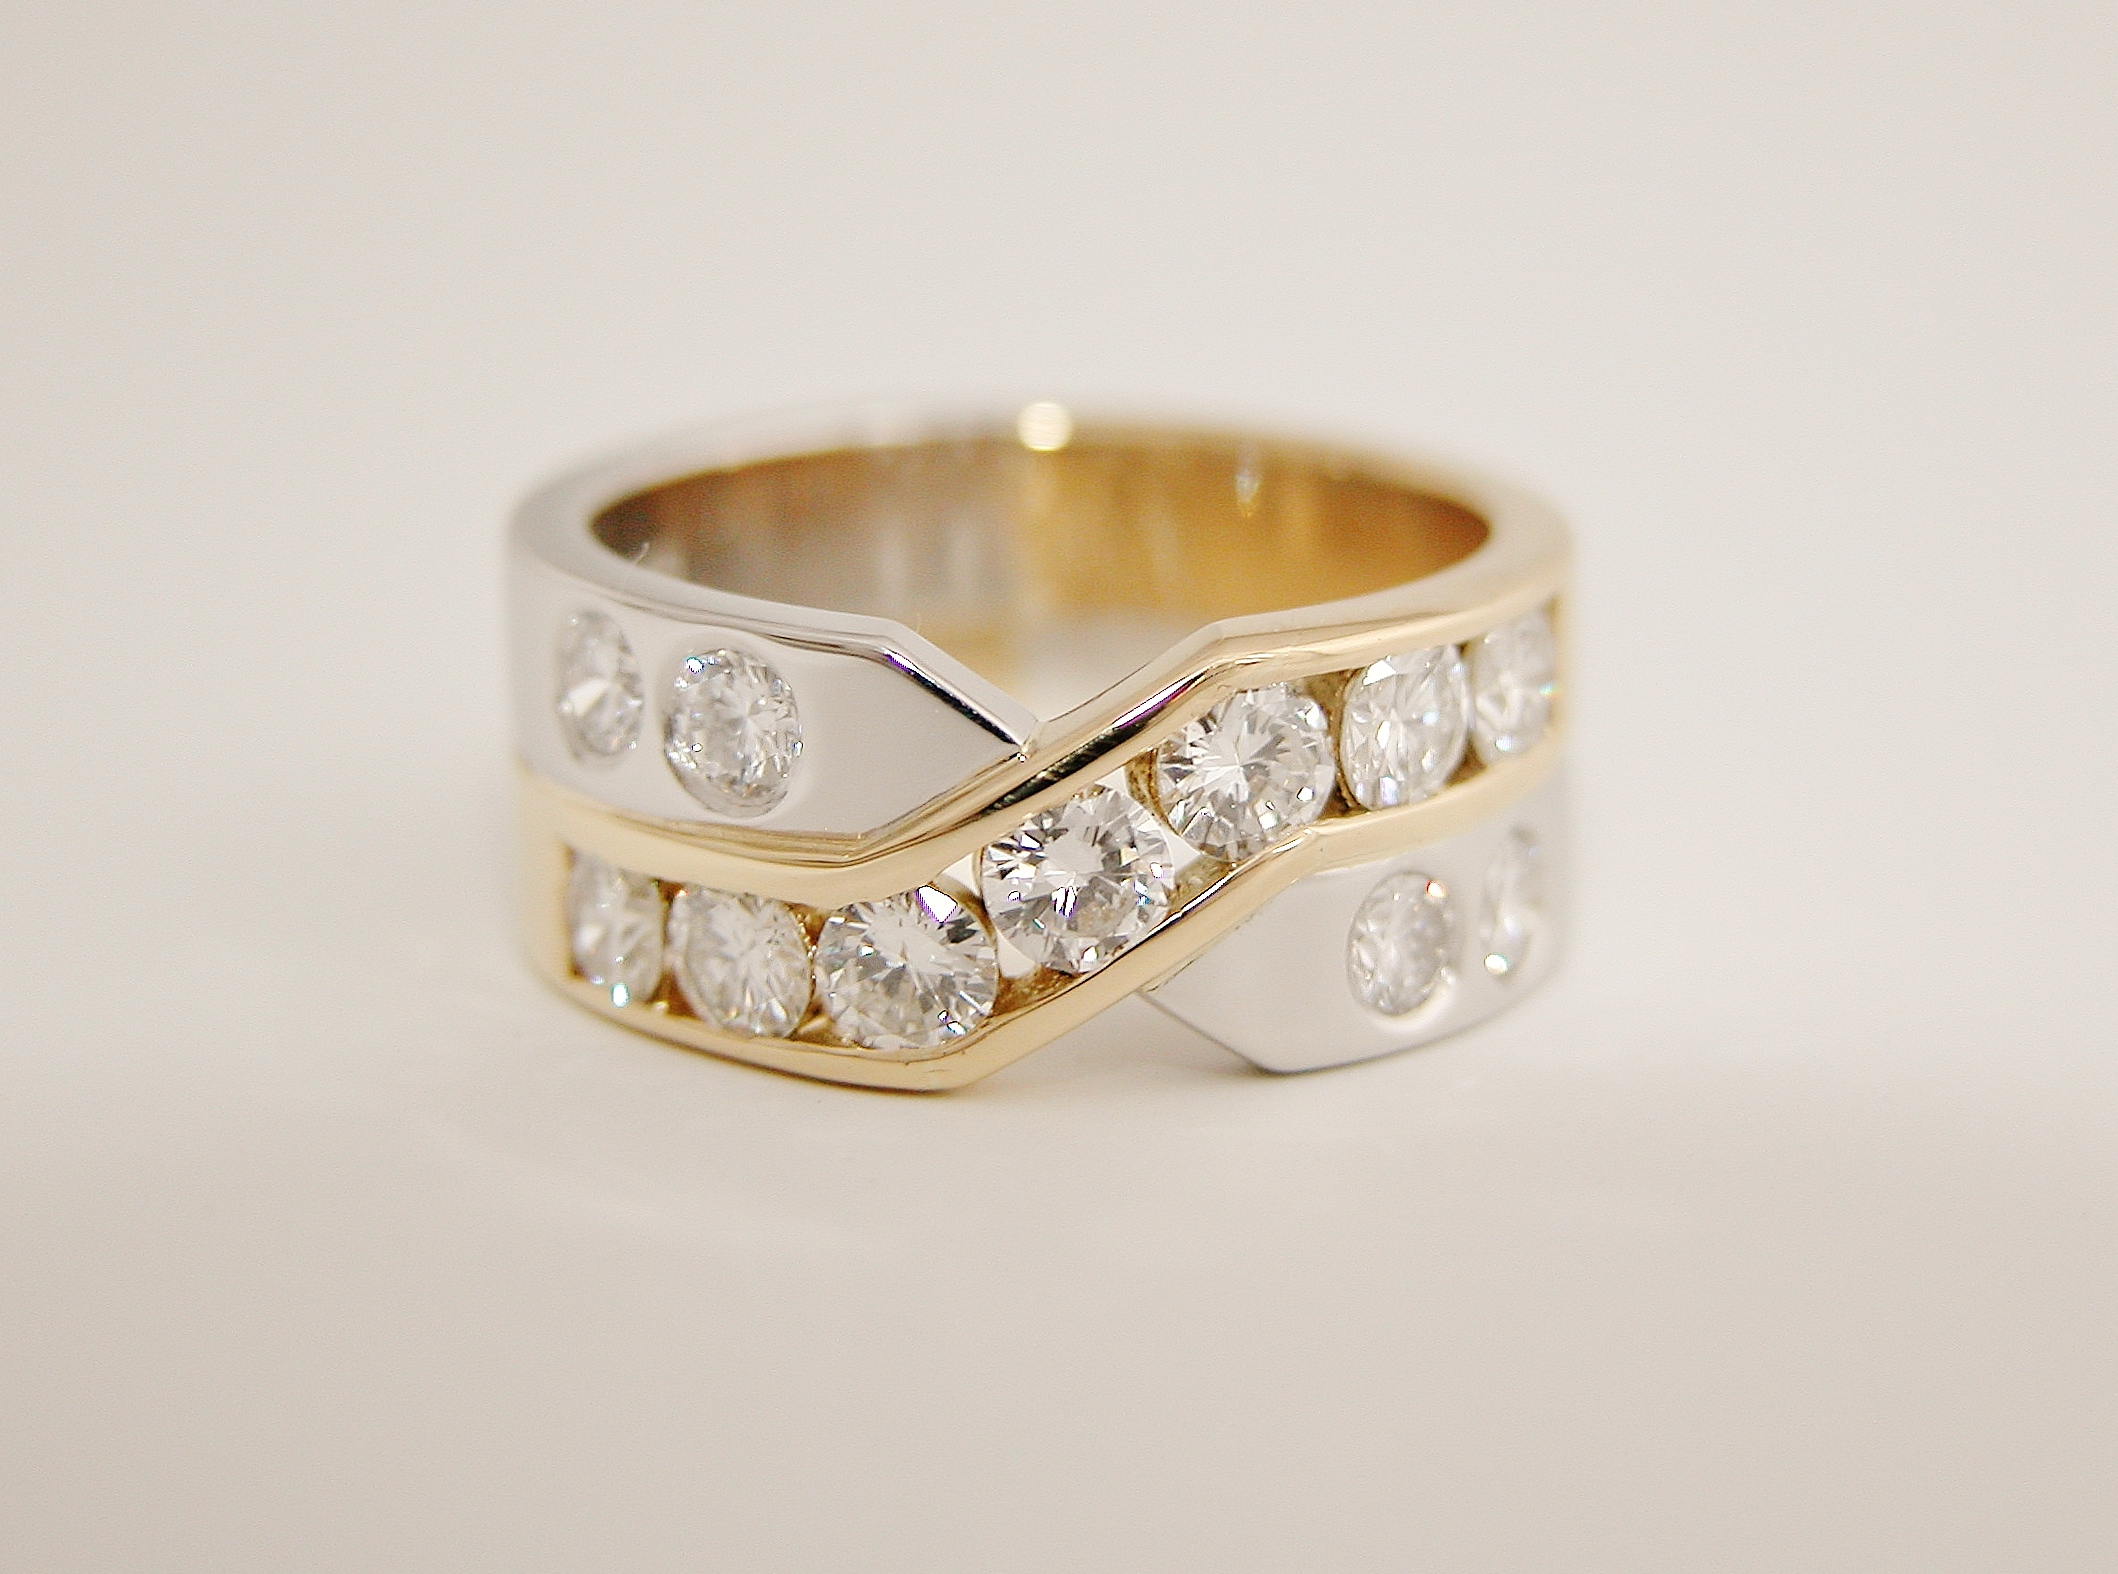 Platinum & 18ct. yellow gold 'X' style ring with 7 round brilliant cut diamonds channel set in the 18ct. yellow gold cross-over panel & 4 flush set diamonds in the platinum.